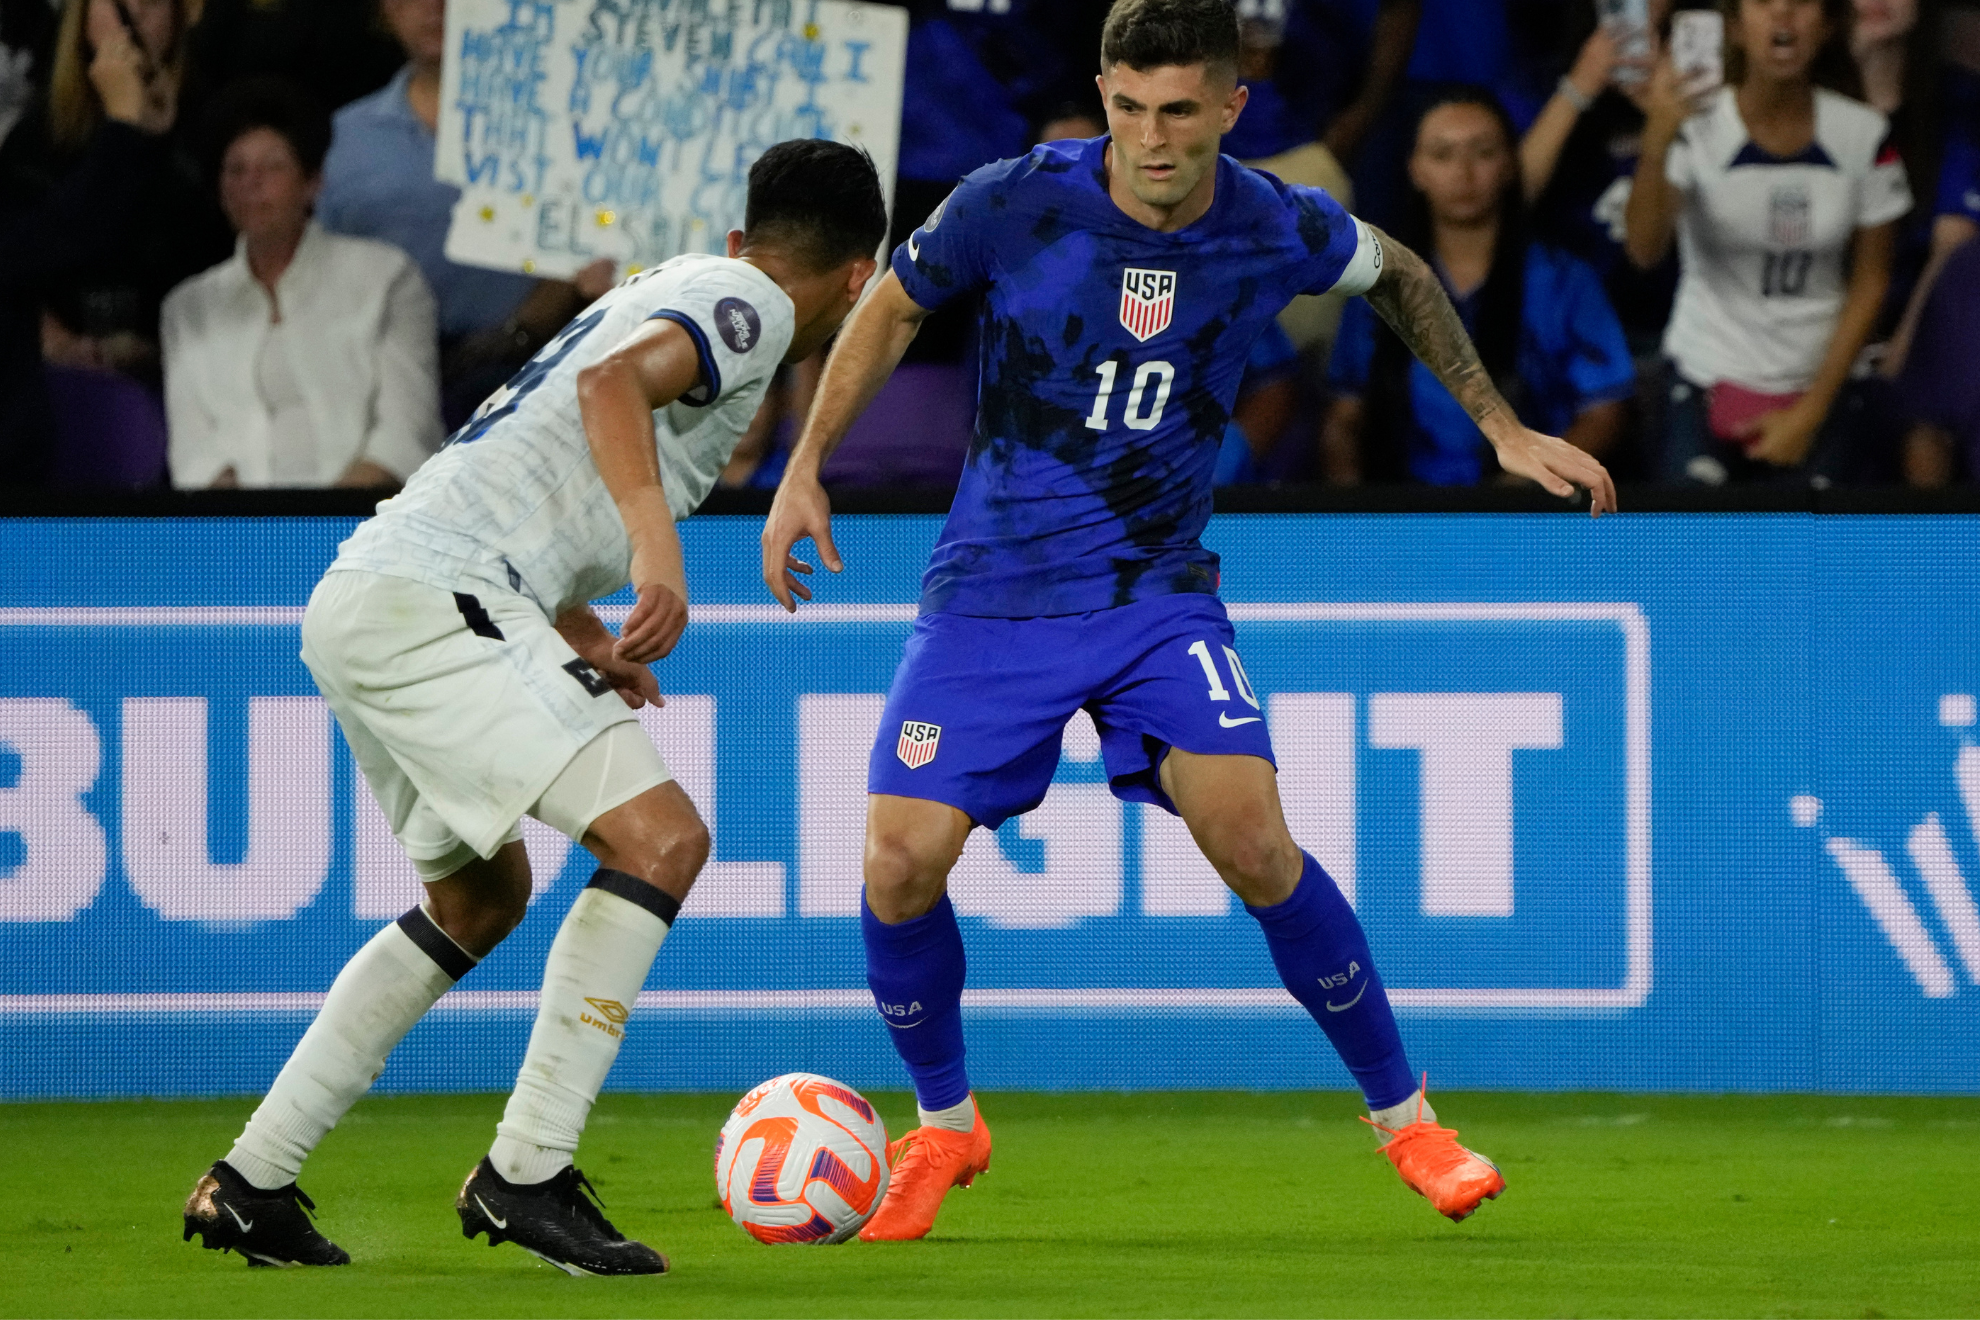 Pulisic endured an injury-plagued season at Chelsea, though he remains a key player for the United States.